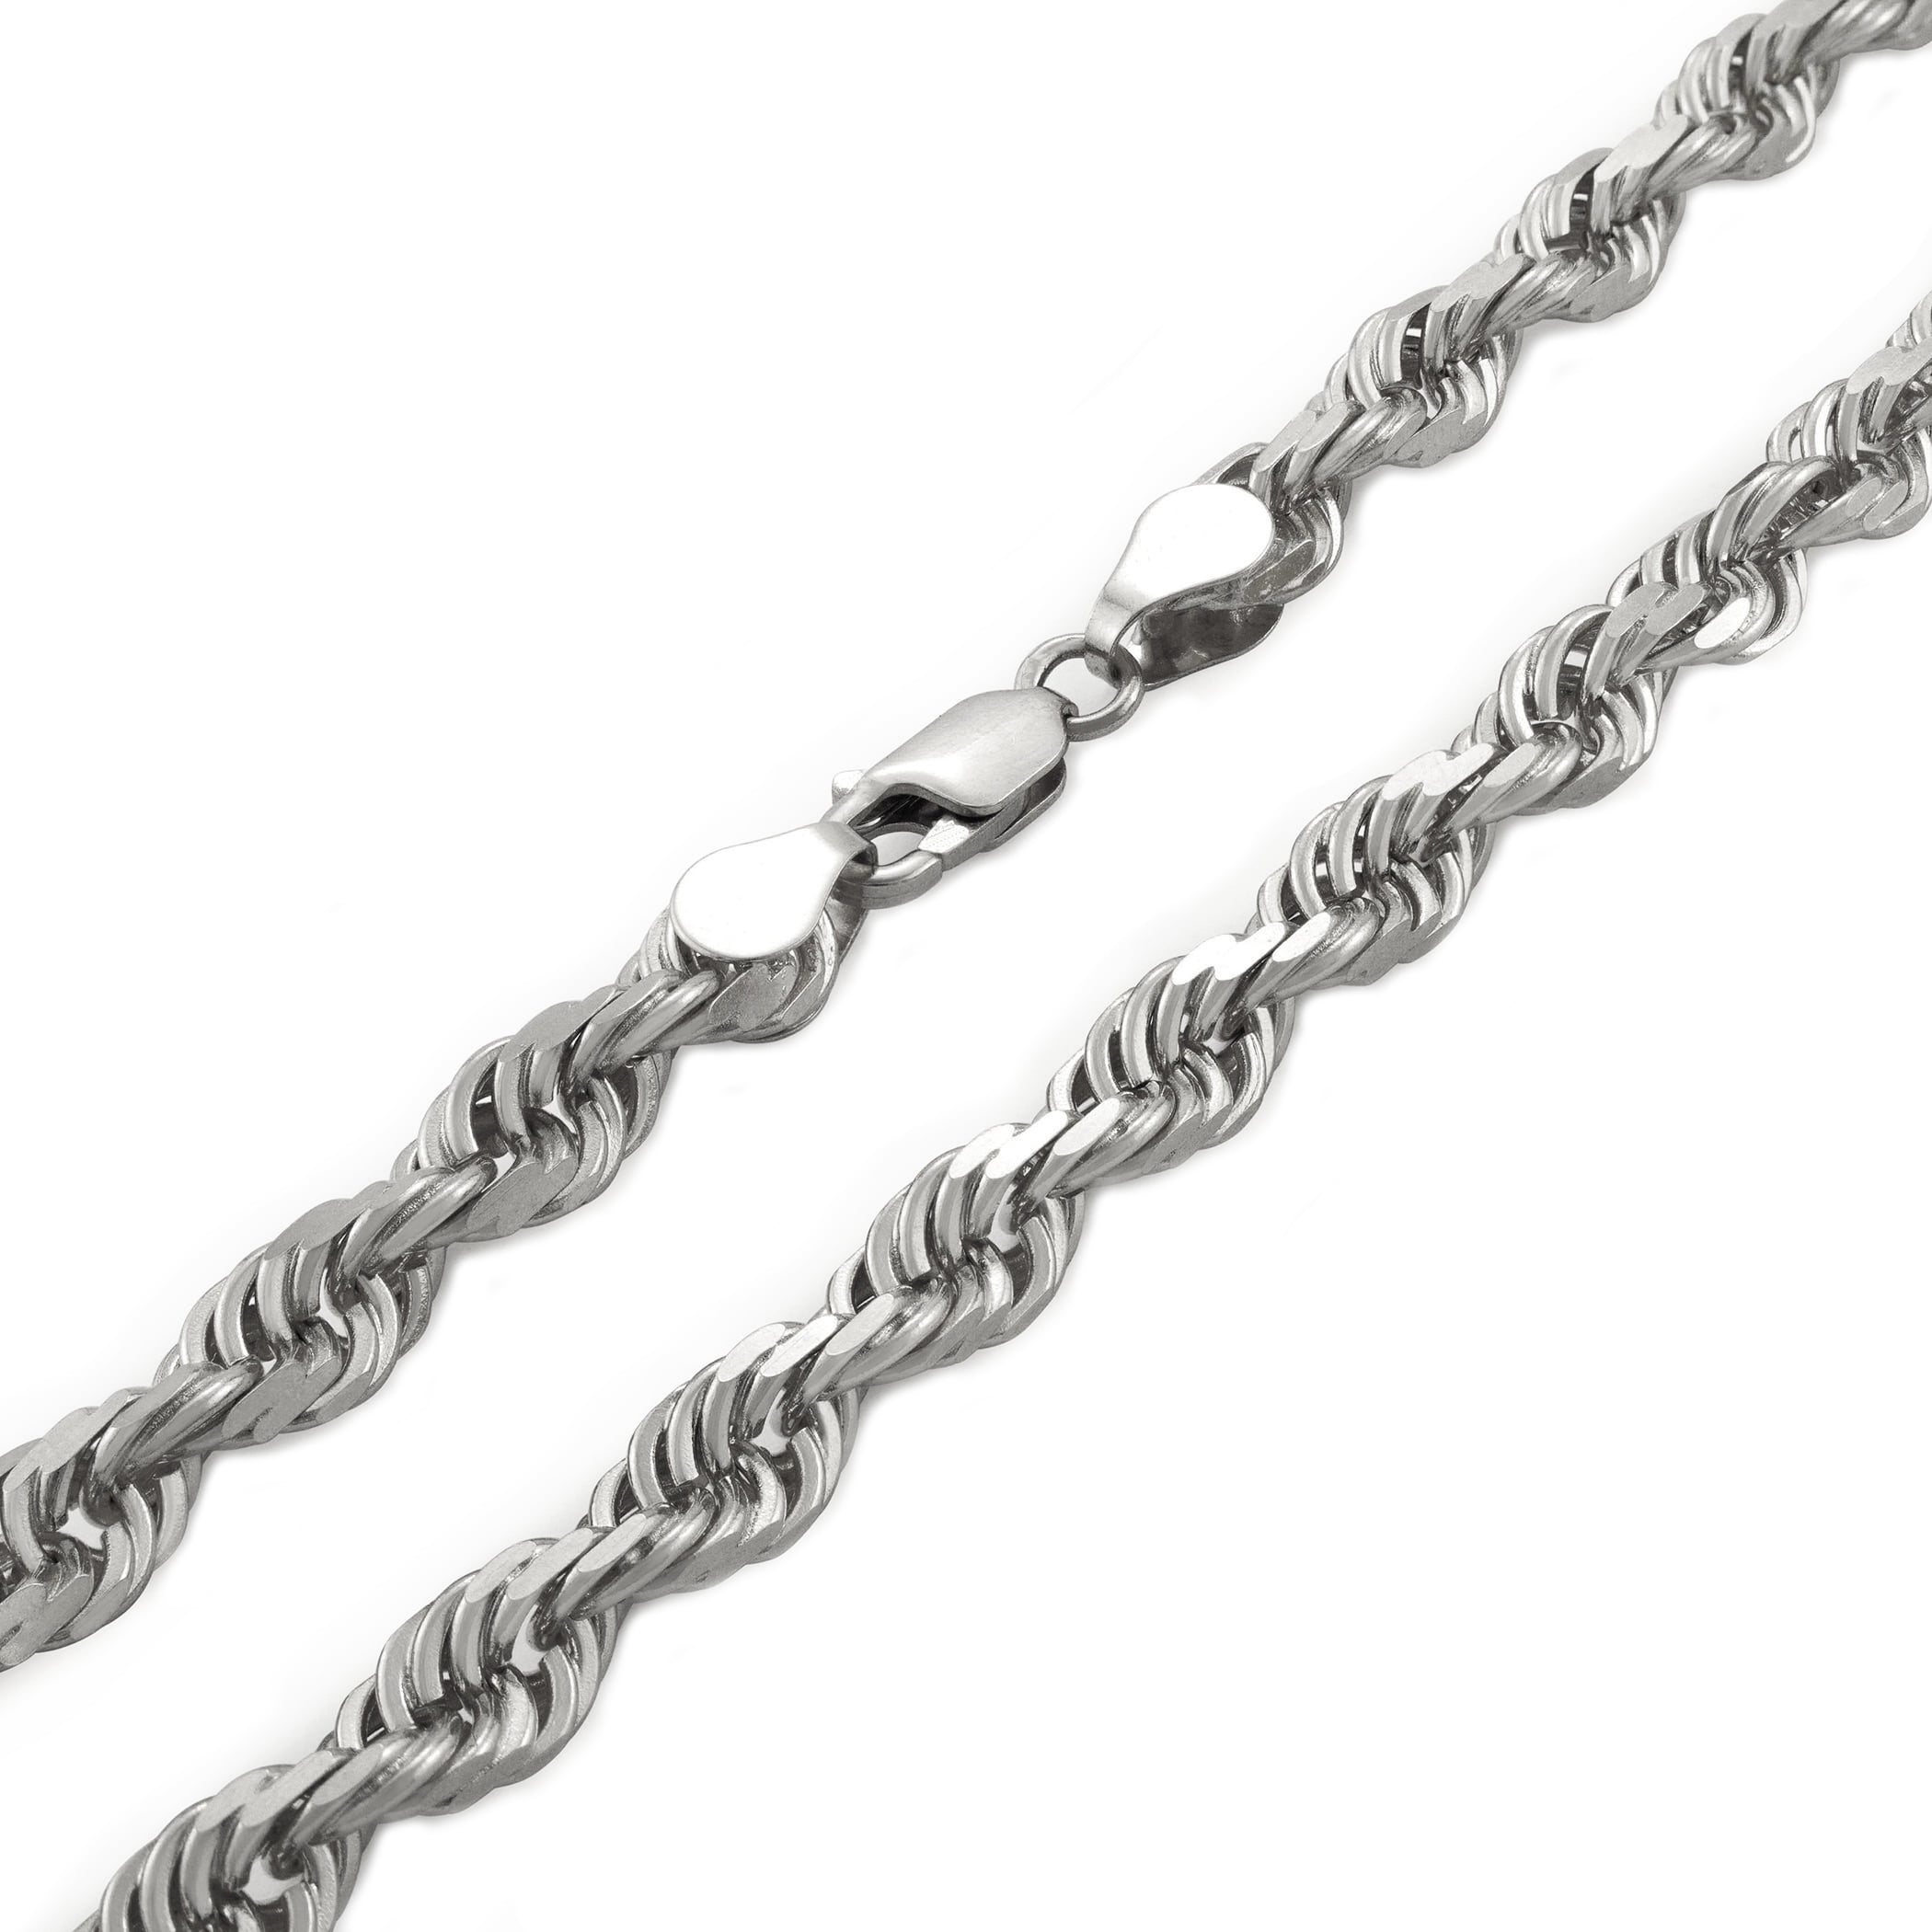 Nuragold 10k White Gold 6mm Rope Chain Diamond Cut Necklace, Mens Jewelry  with Lobster Clasp 20